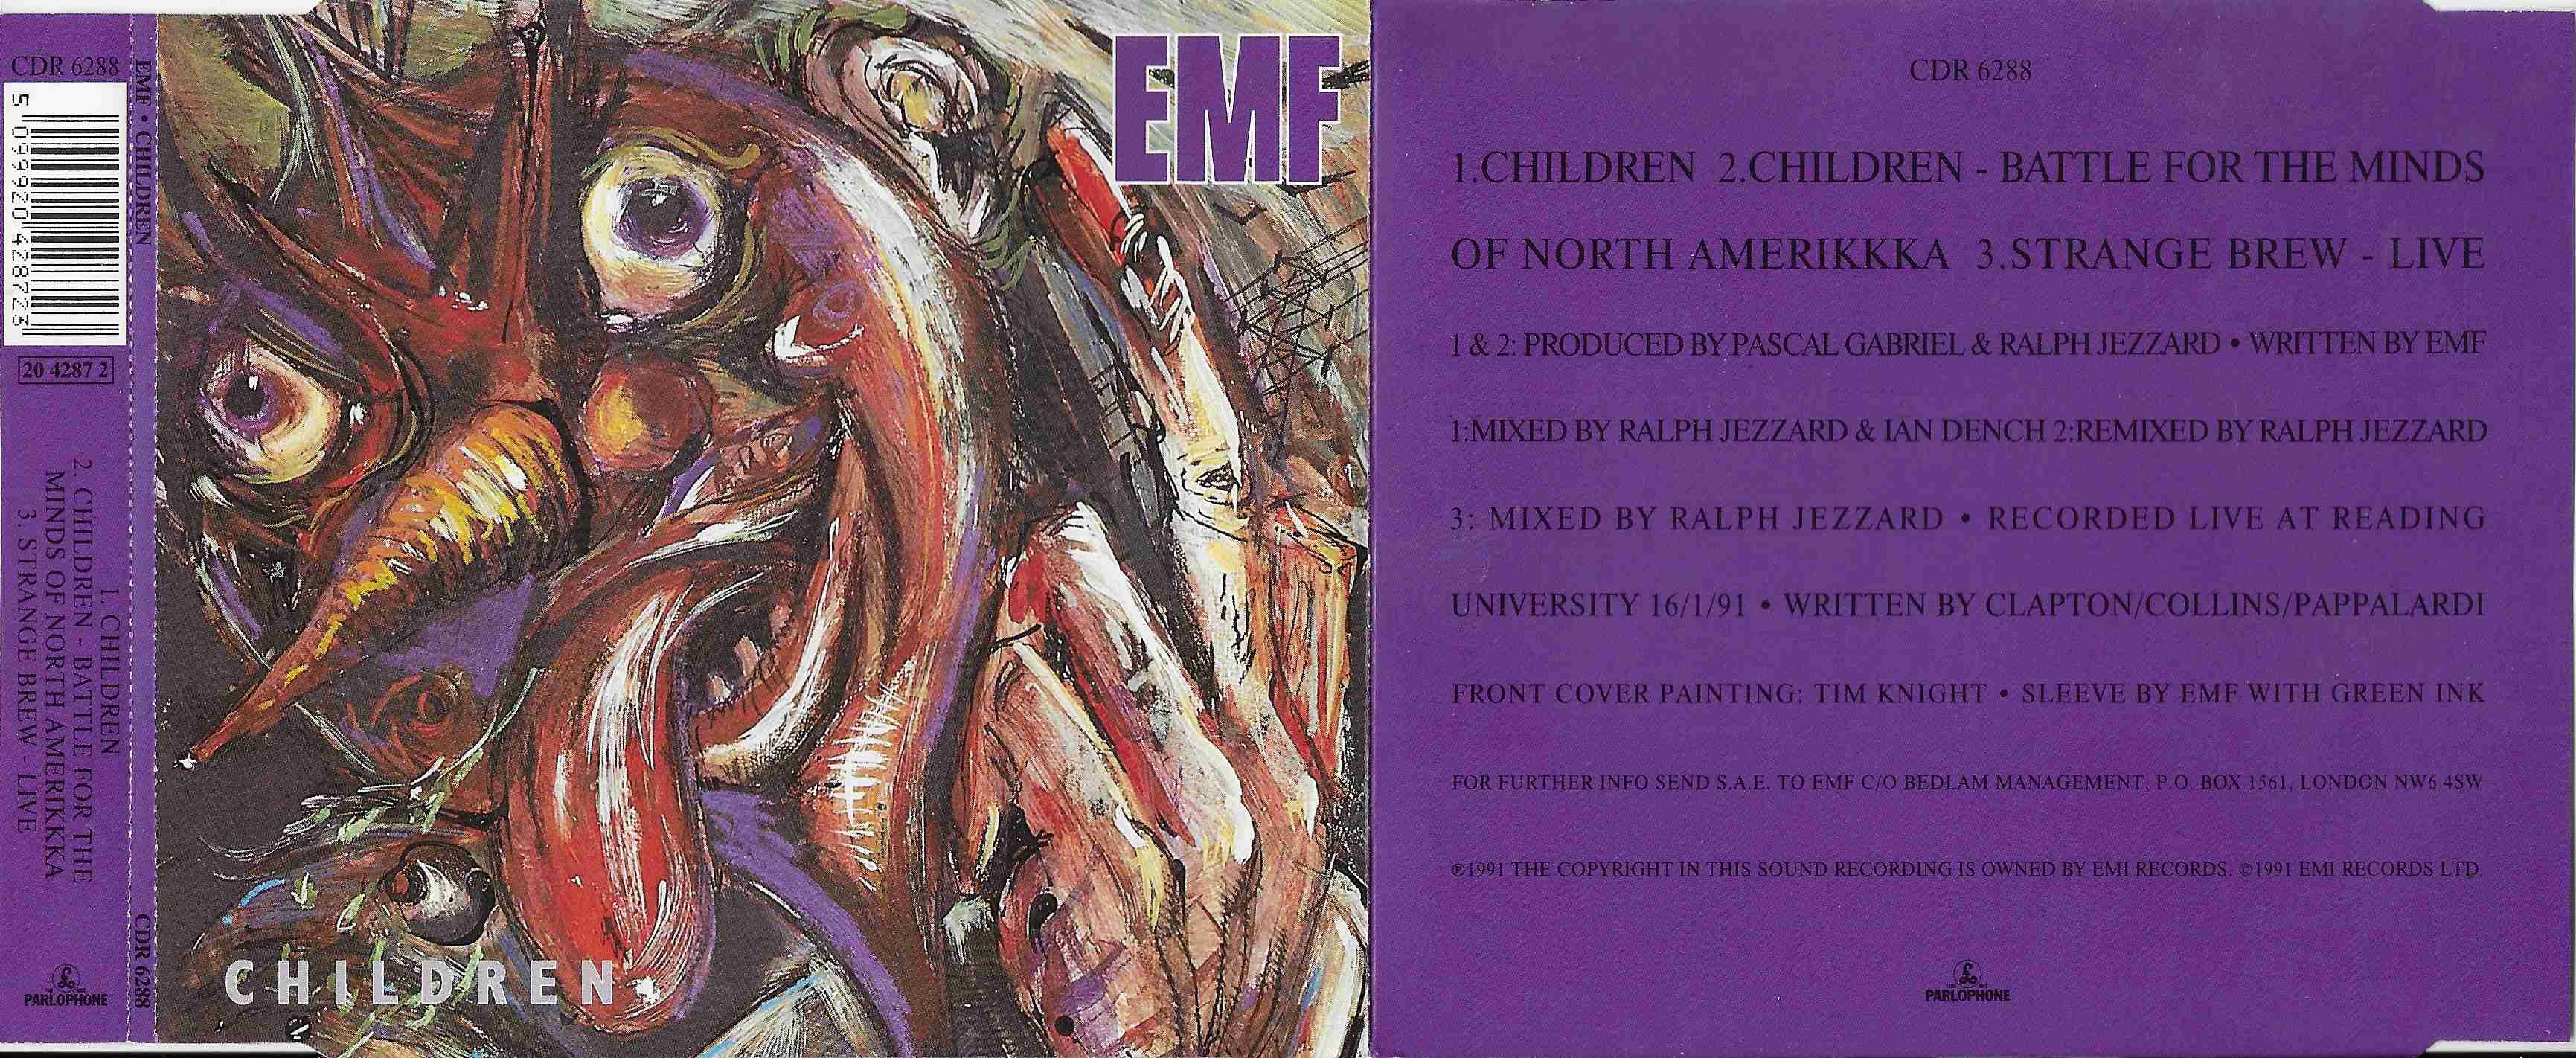 Back cover of CDR 6288